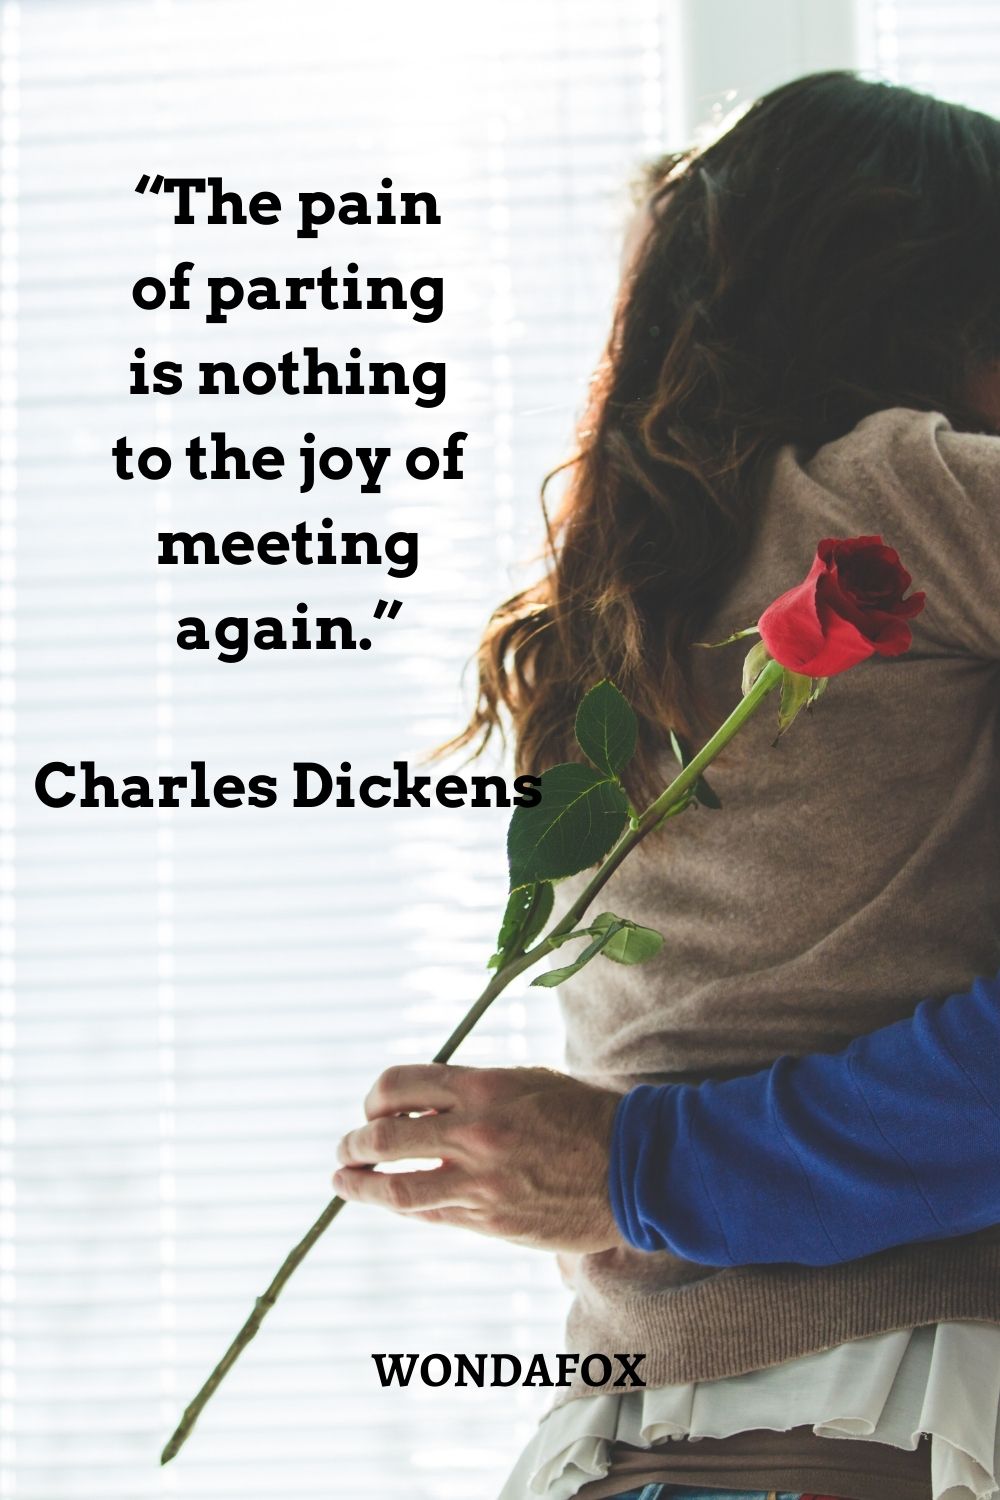 “The pain of parting is nothing to the joy of meeting again.”
Charles Dickens